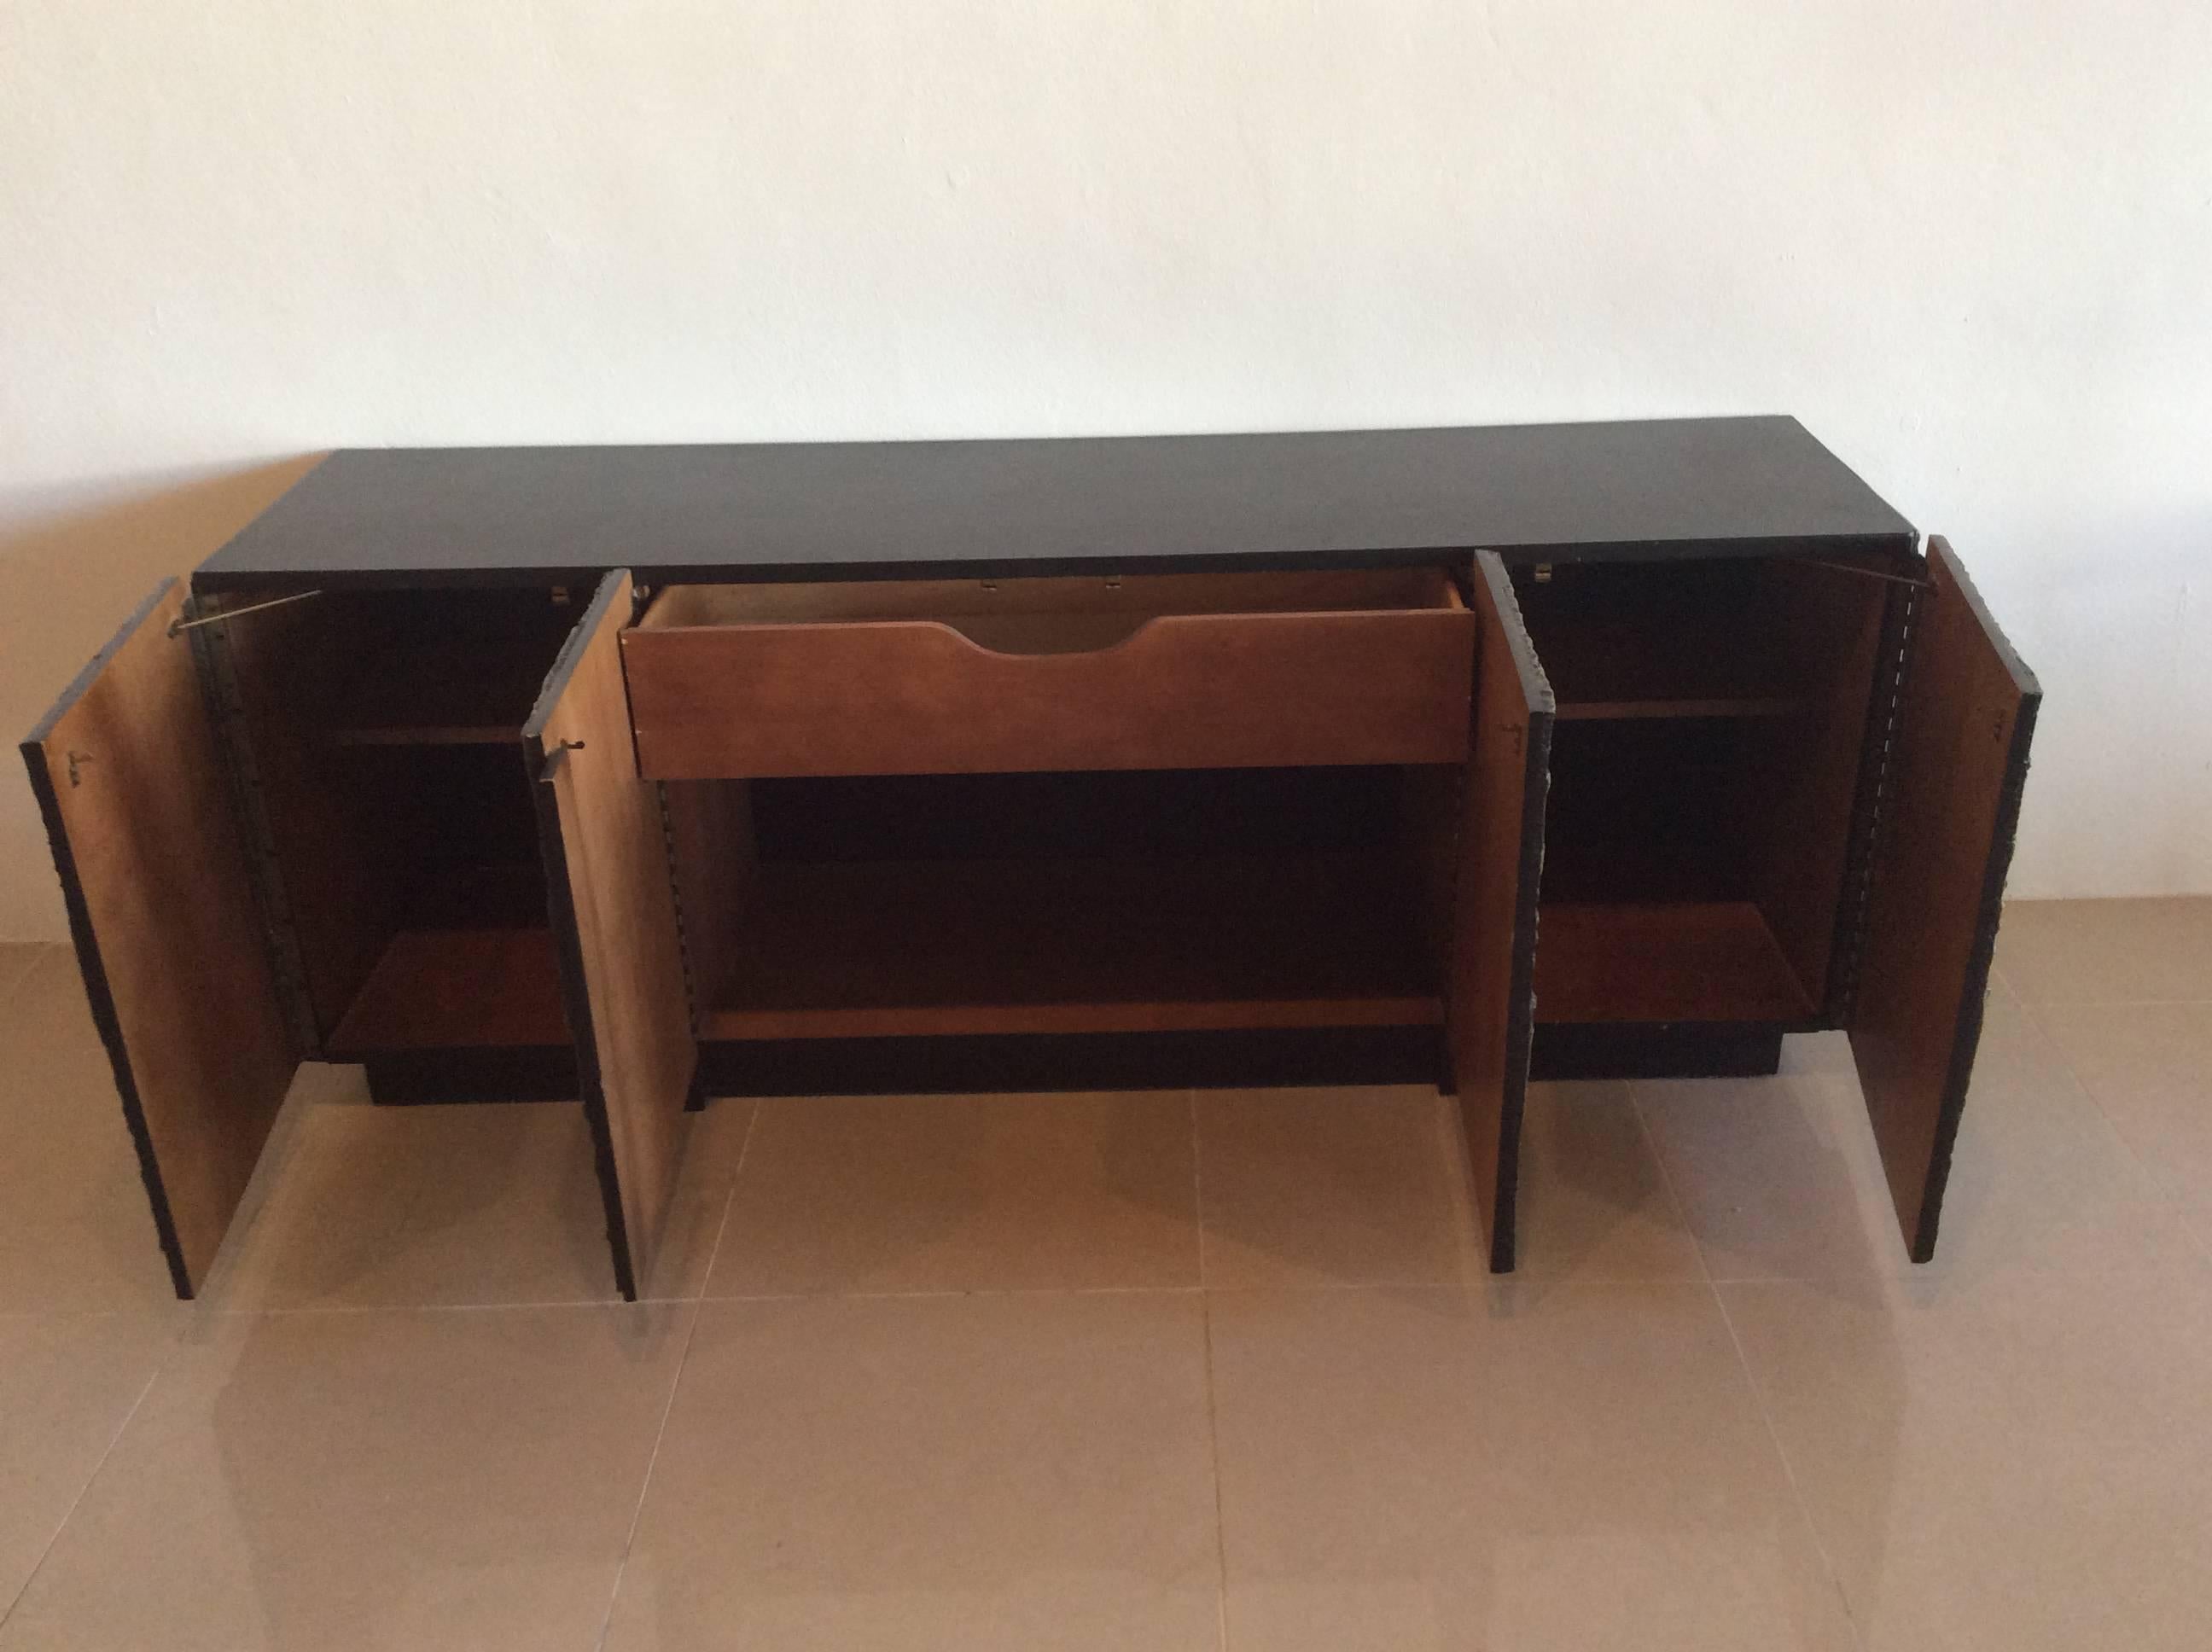 20th Century Adrian Pearsall Sideboard Buffet Cabinet, Vintage Brutalist Mid-Century Moder